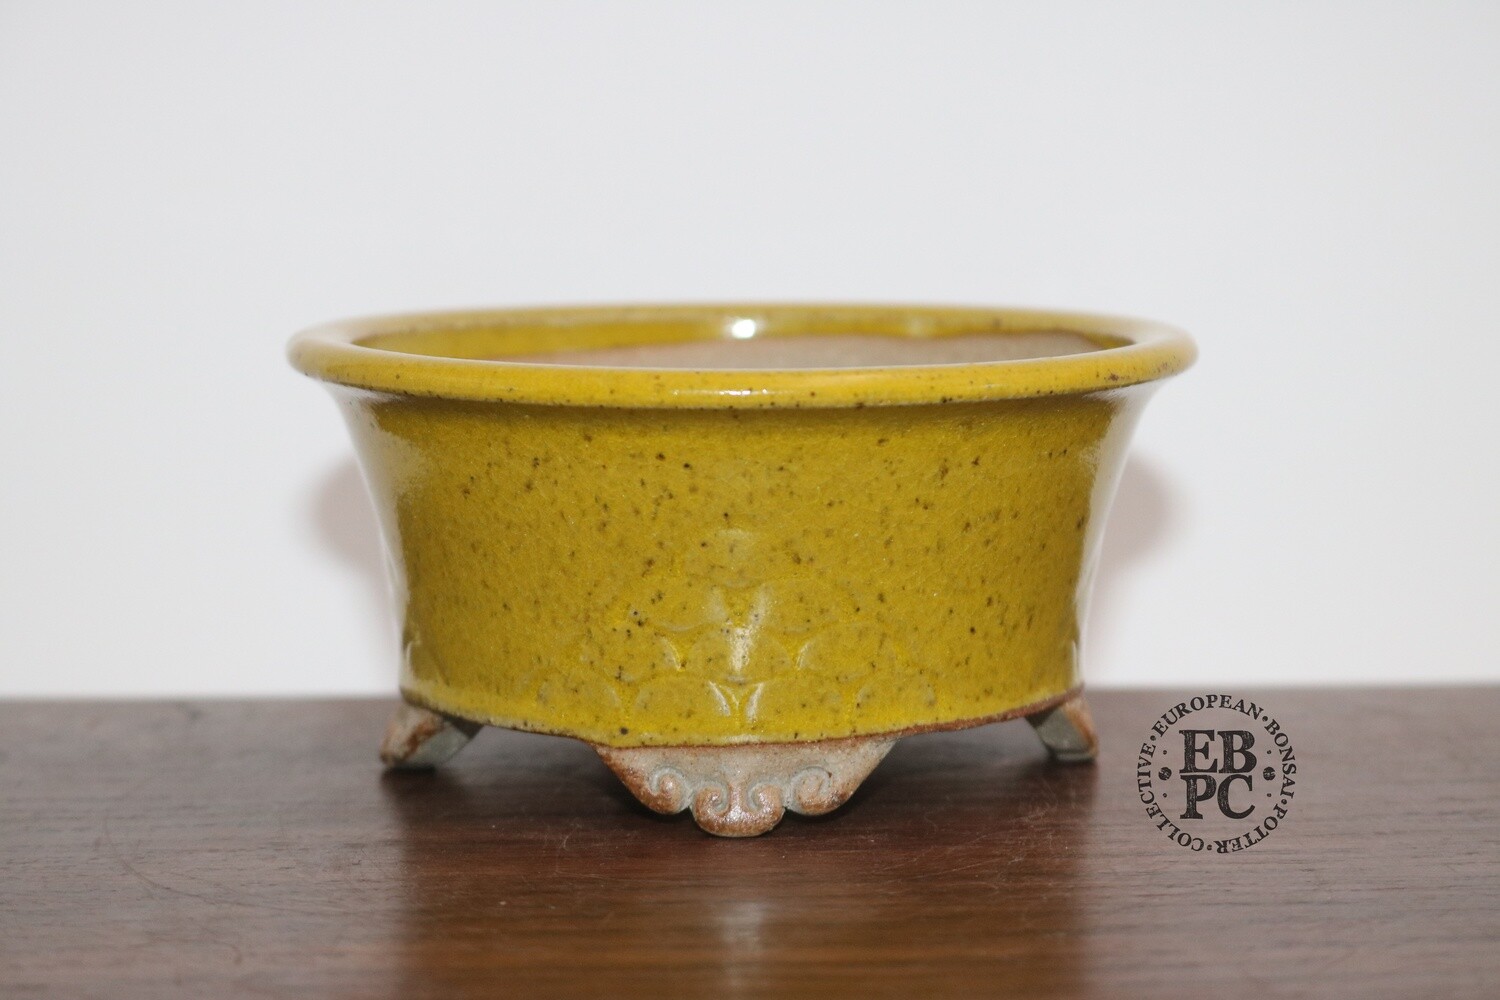 SOLD - Gramming Pots - 12.5cm; 'Sublime Yellows Range'; Carved Dragonscale design; Glazed; Wood-fired; Carved feet; Tomas Gramming